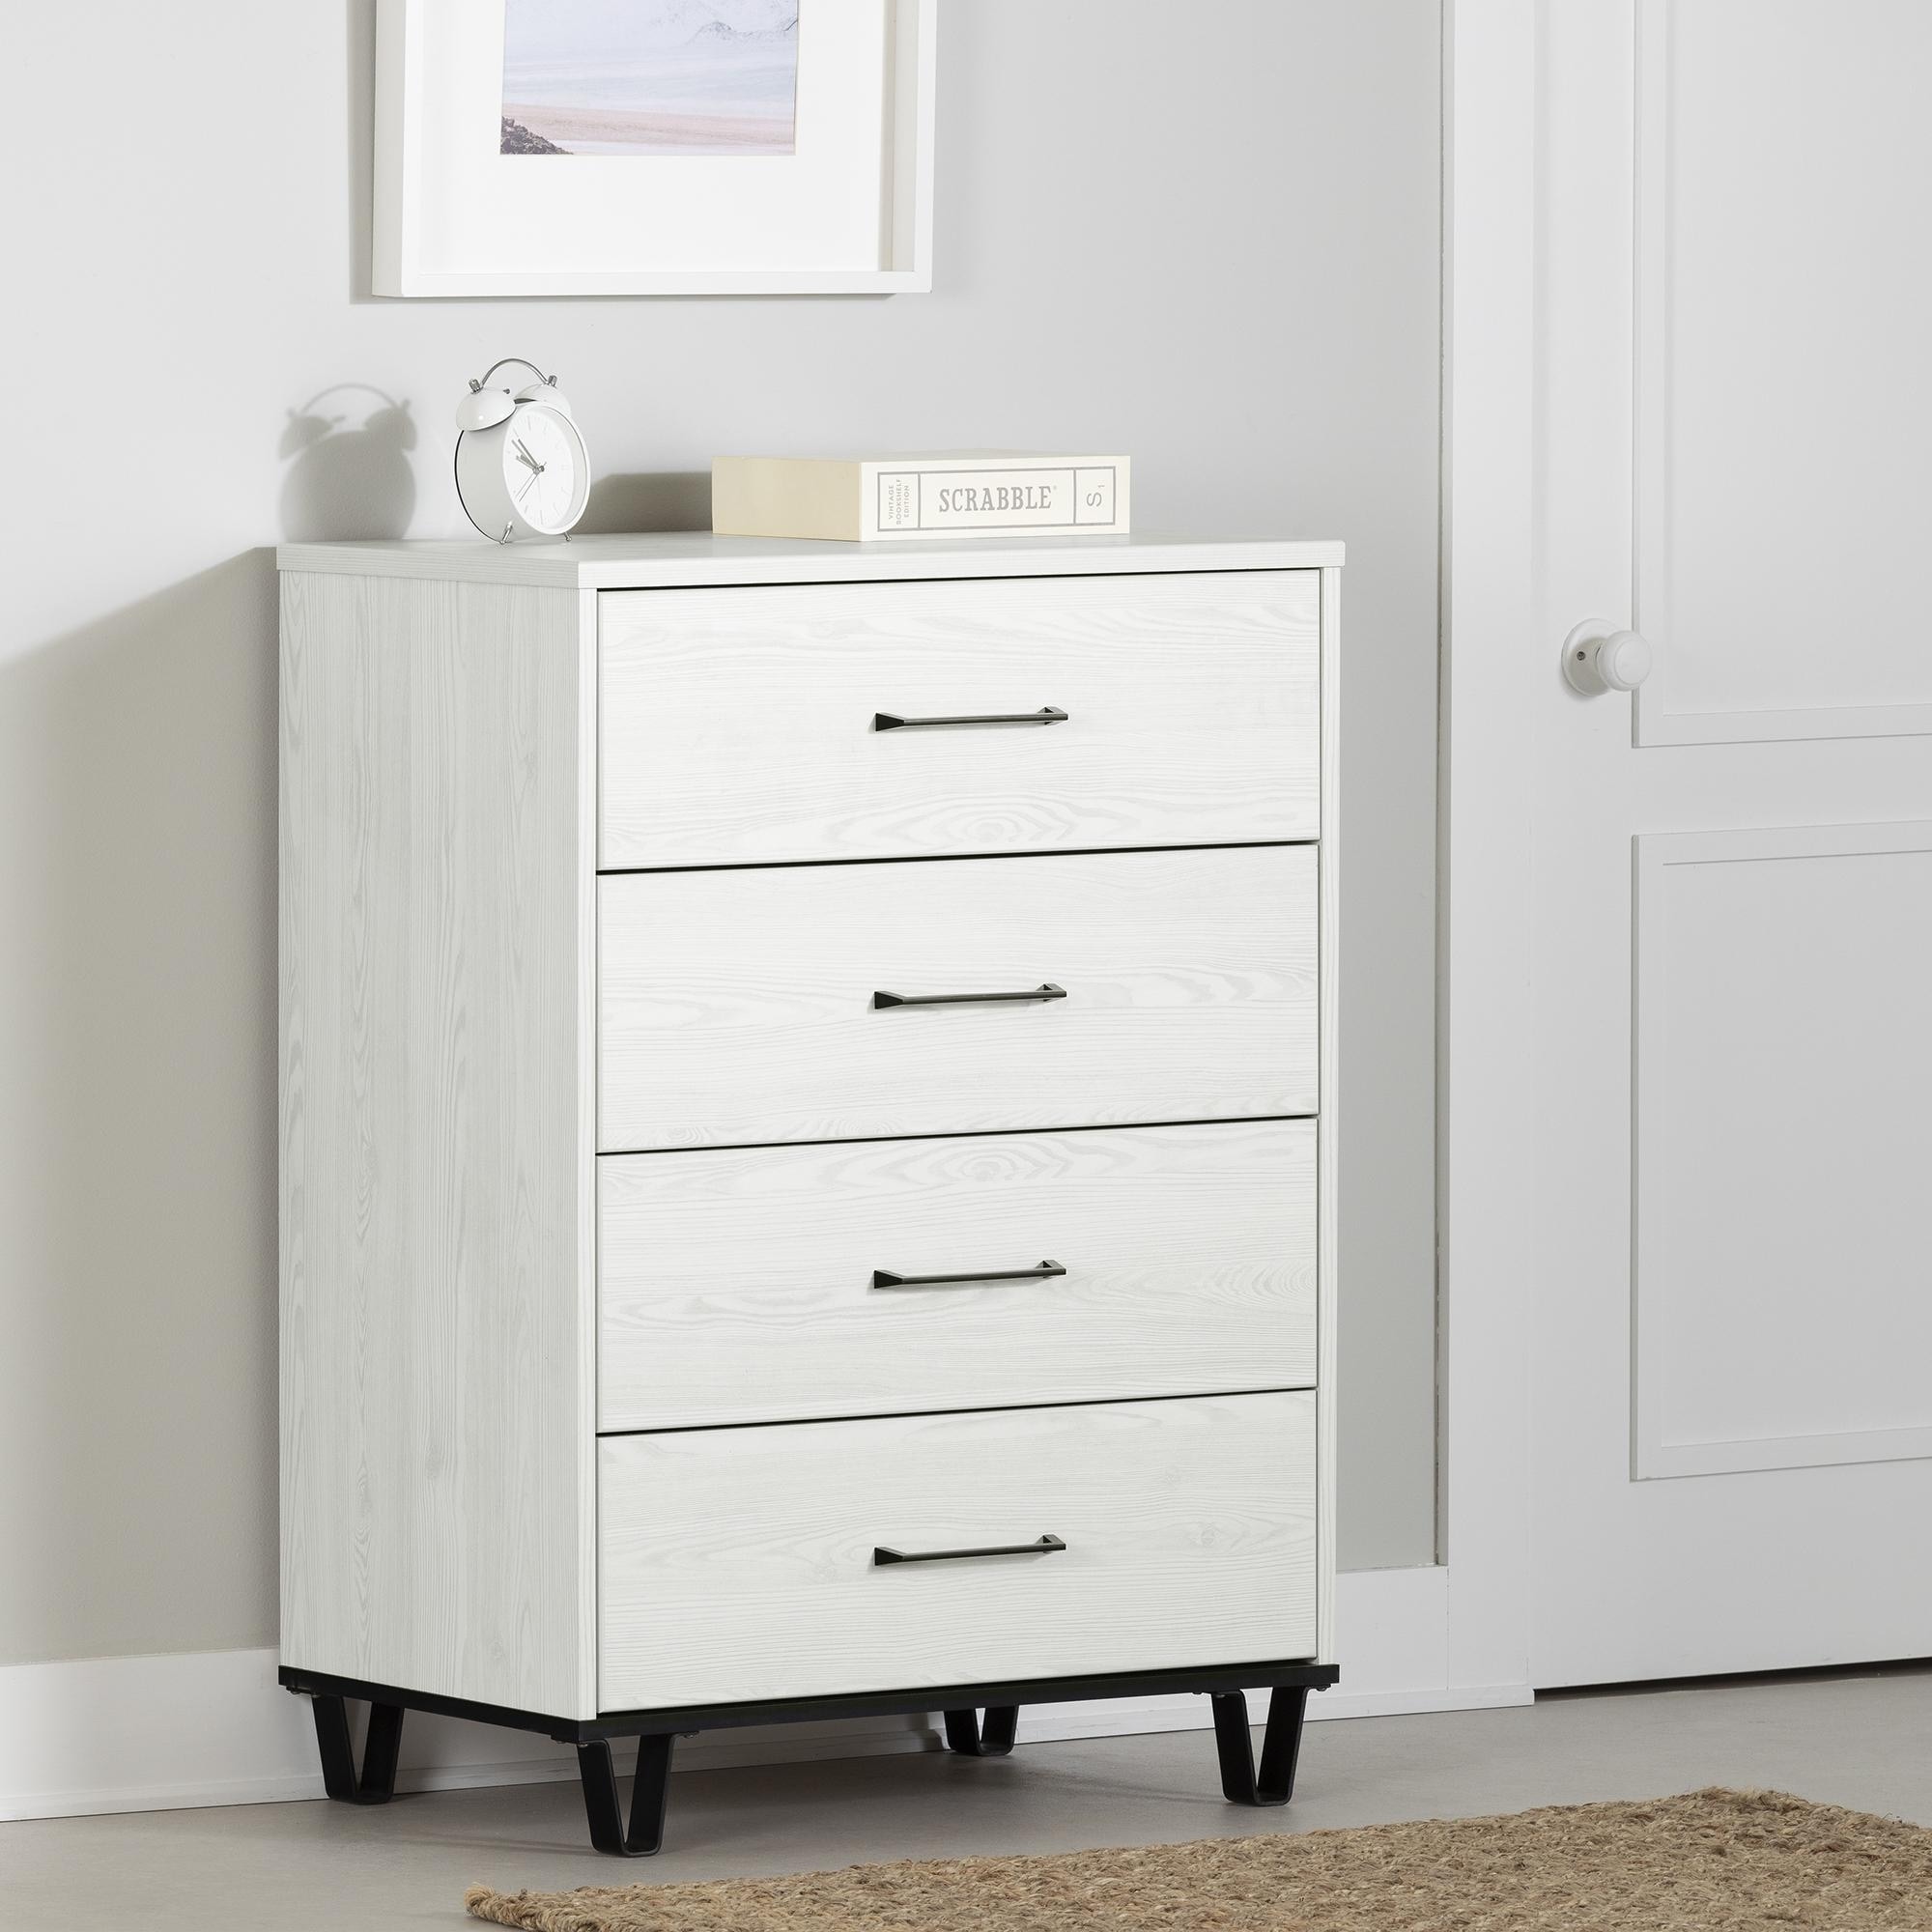 https://ak1.ostkcdn.com/images/products/is/images/direct/444b6444658162688dfc036807aca07918479ac2/South-Shore-Arlen-4-Drawer-Chest.jpg